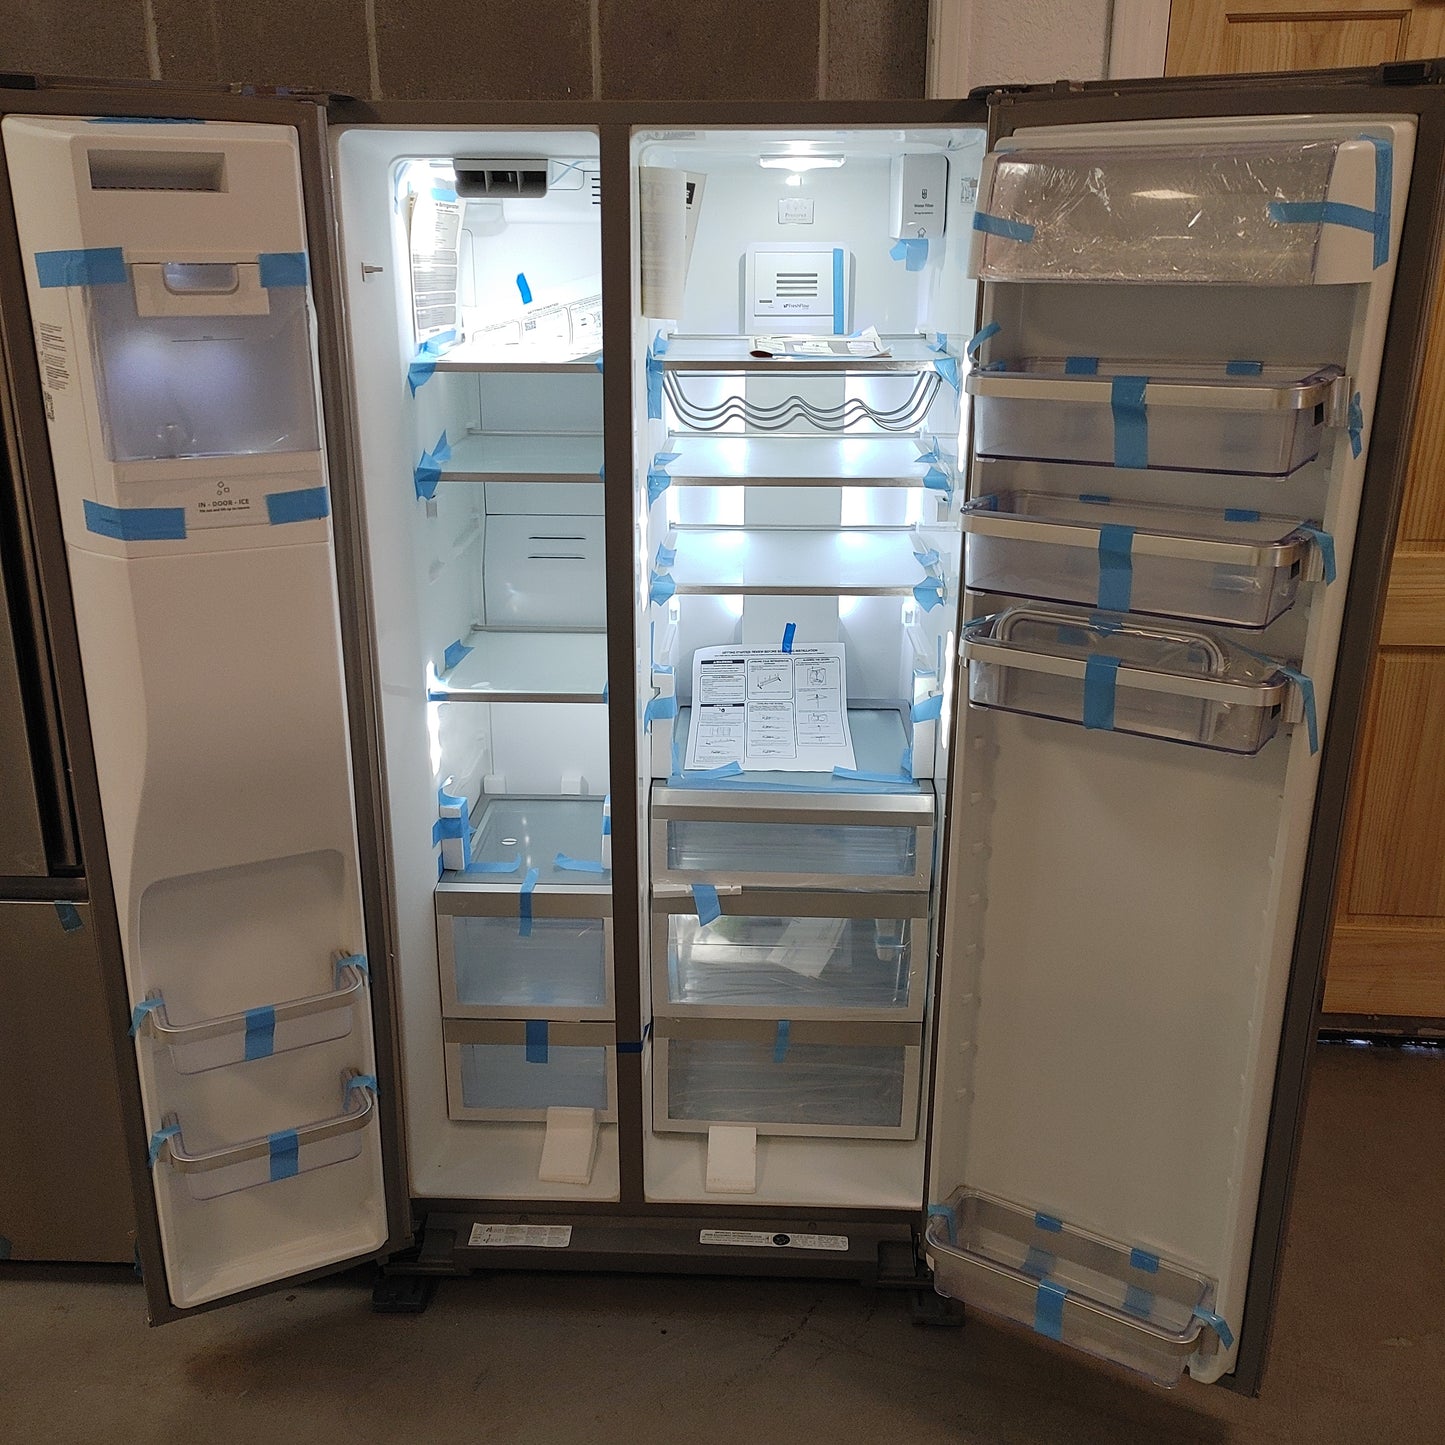 New Kitchen Aid 36 in Stainless Side By Side Refrigerator With Ice And Water in the Door